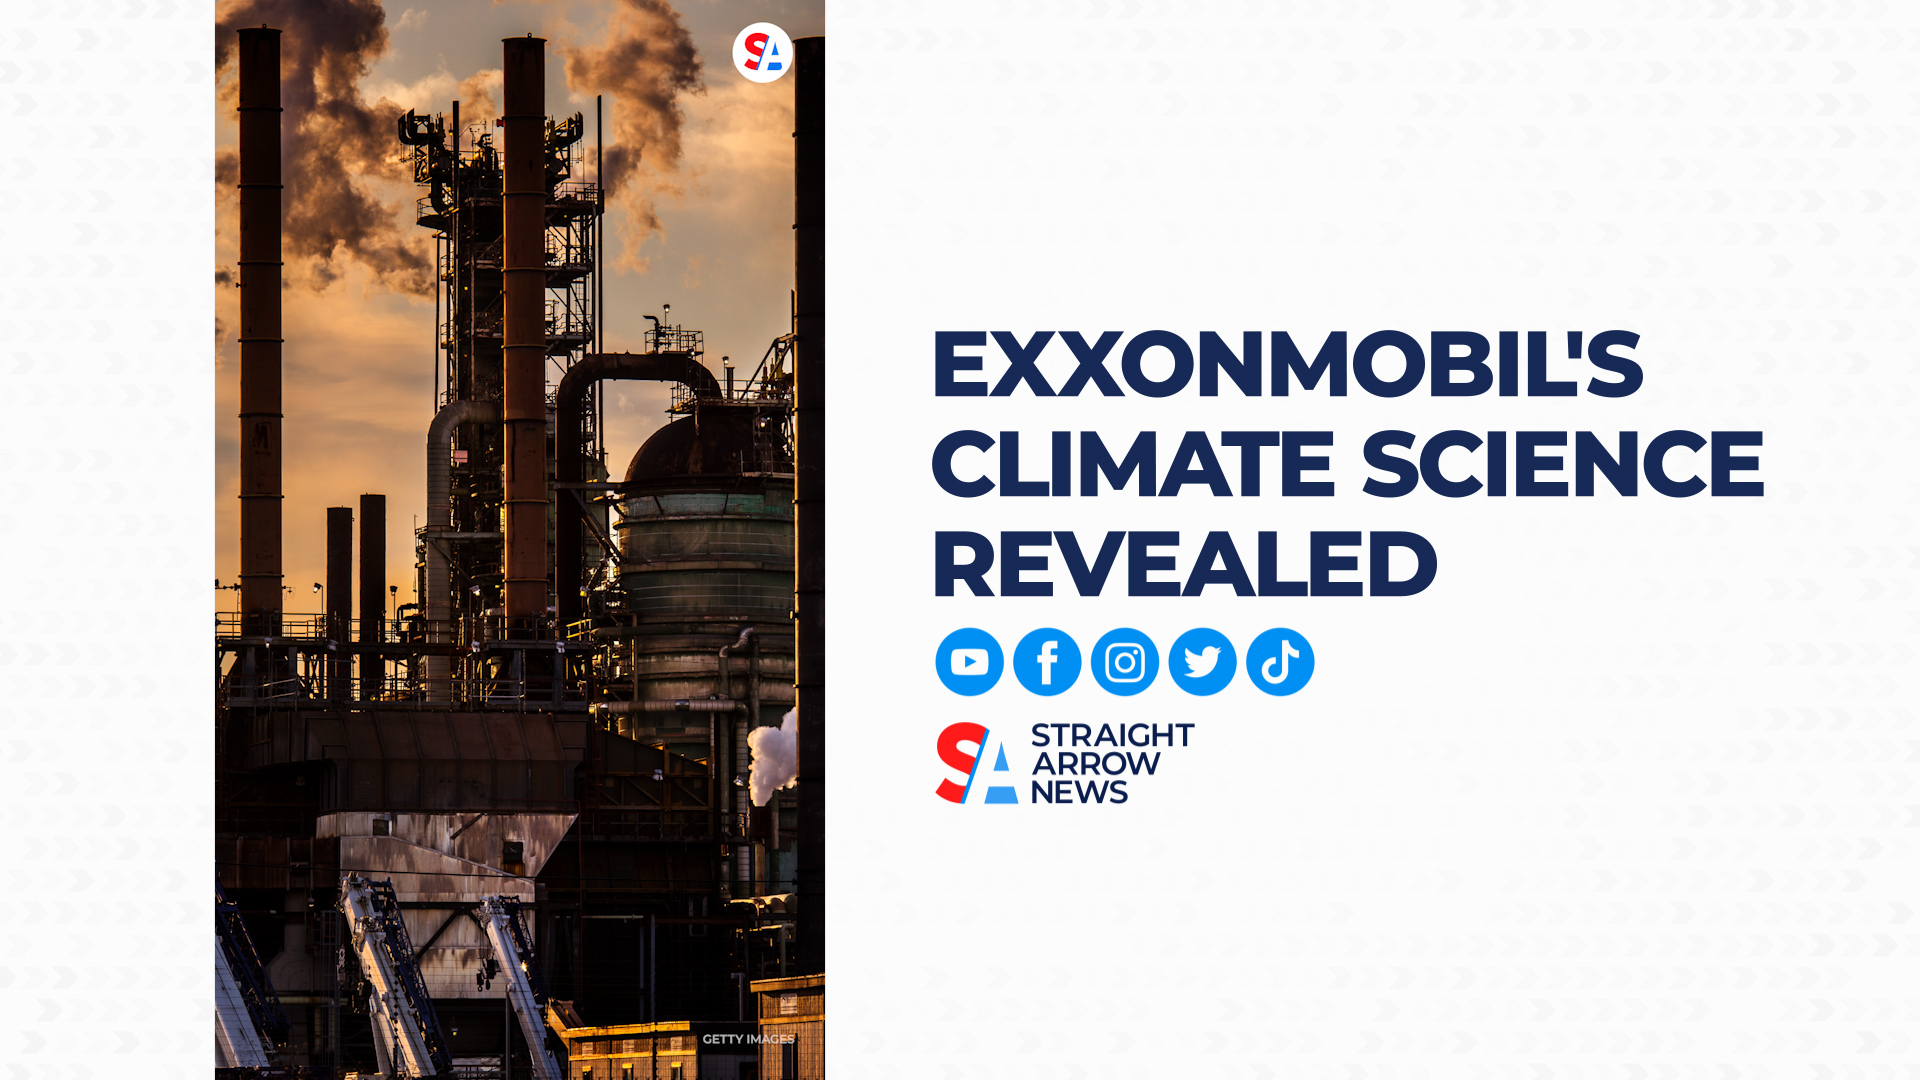 A new study has revealed ExxonMobil's knowledge of potential effects of fossil fuels on global warming decades ago.